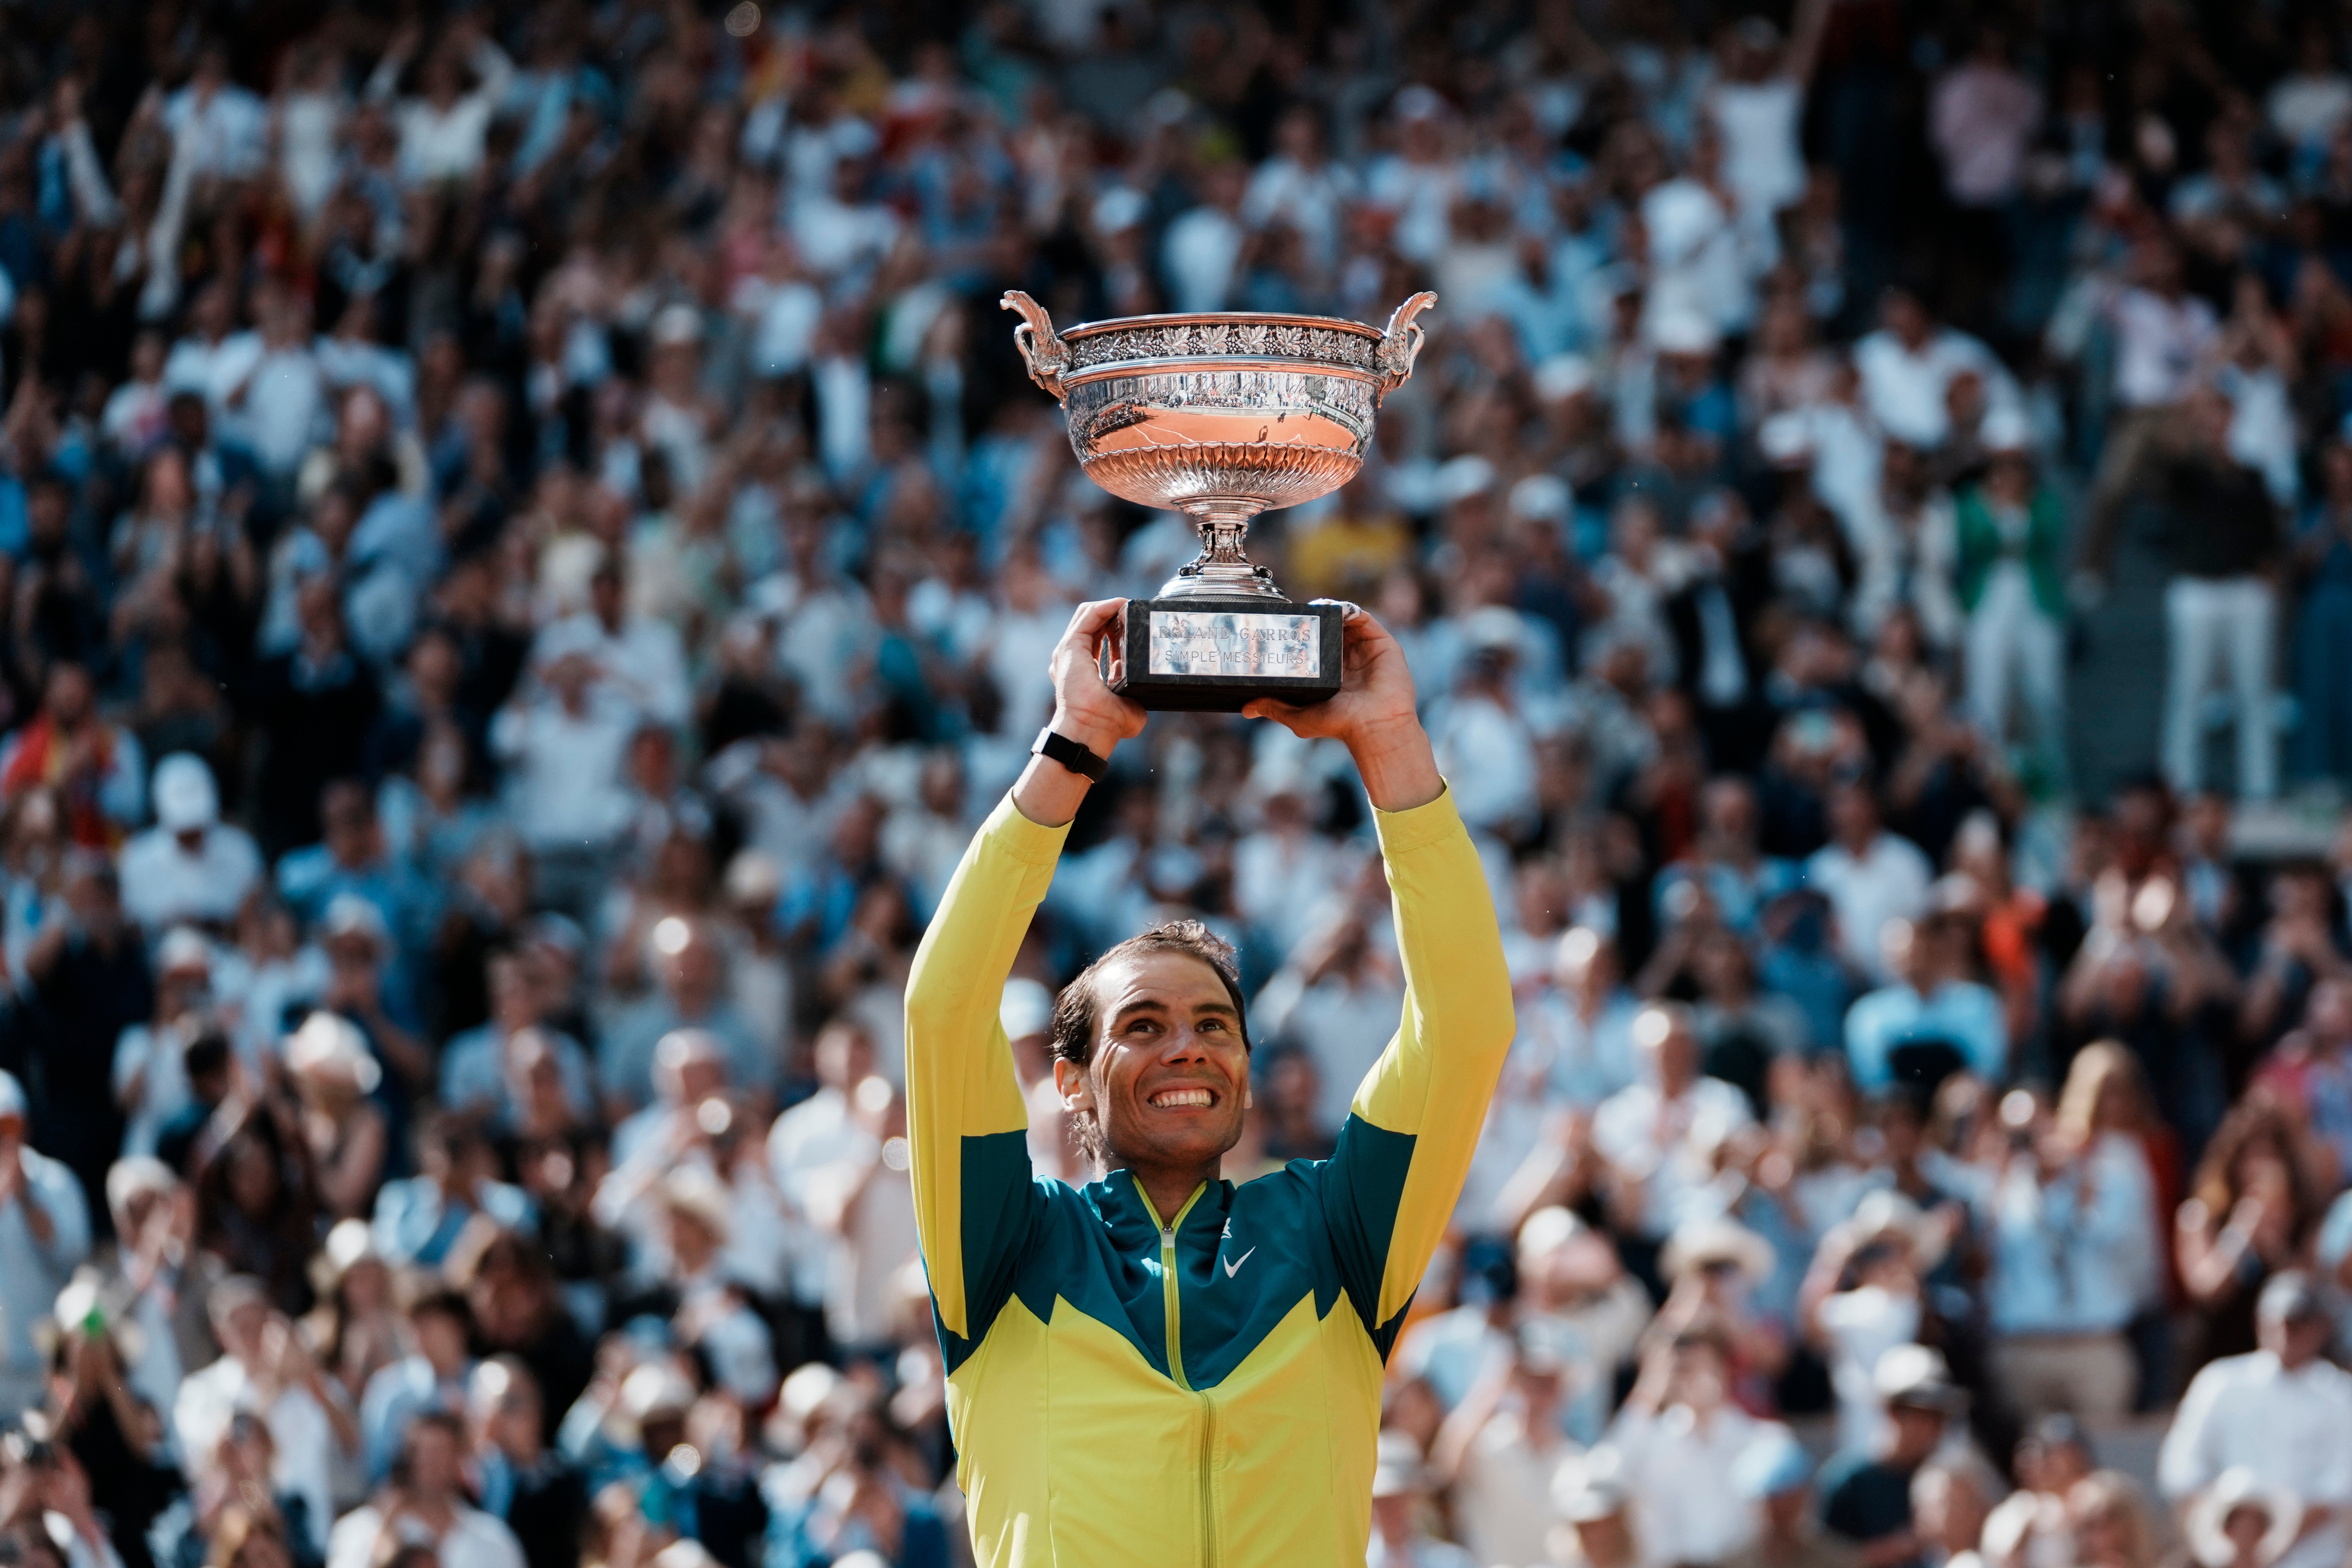 Nadal claimed a 14th French Open title on Sunday